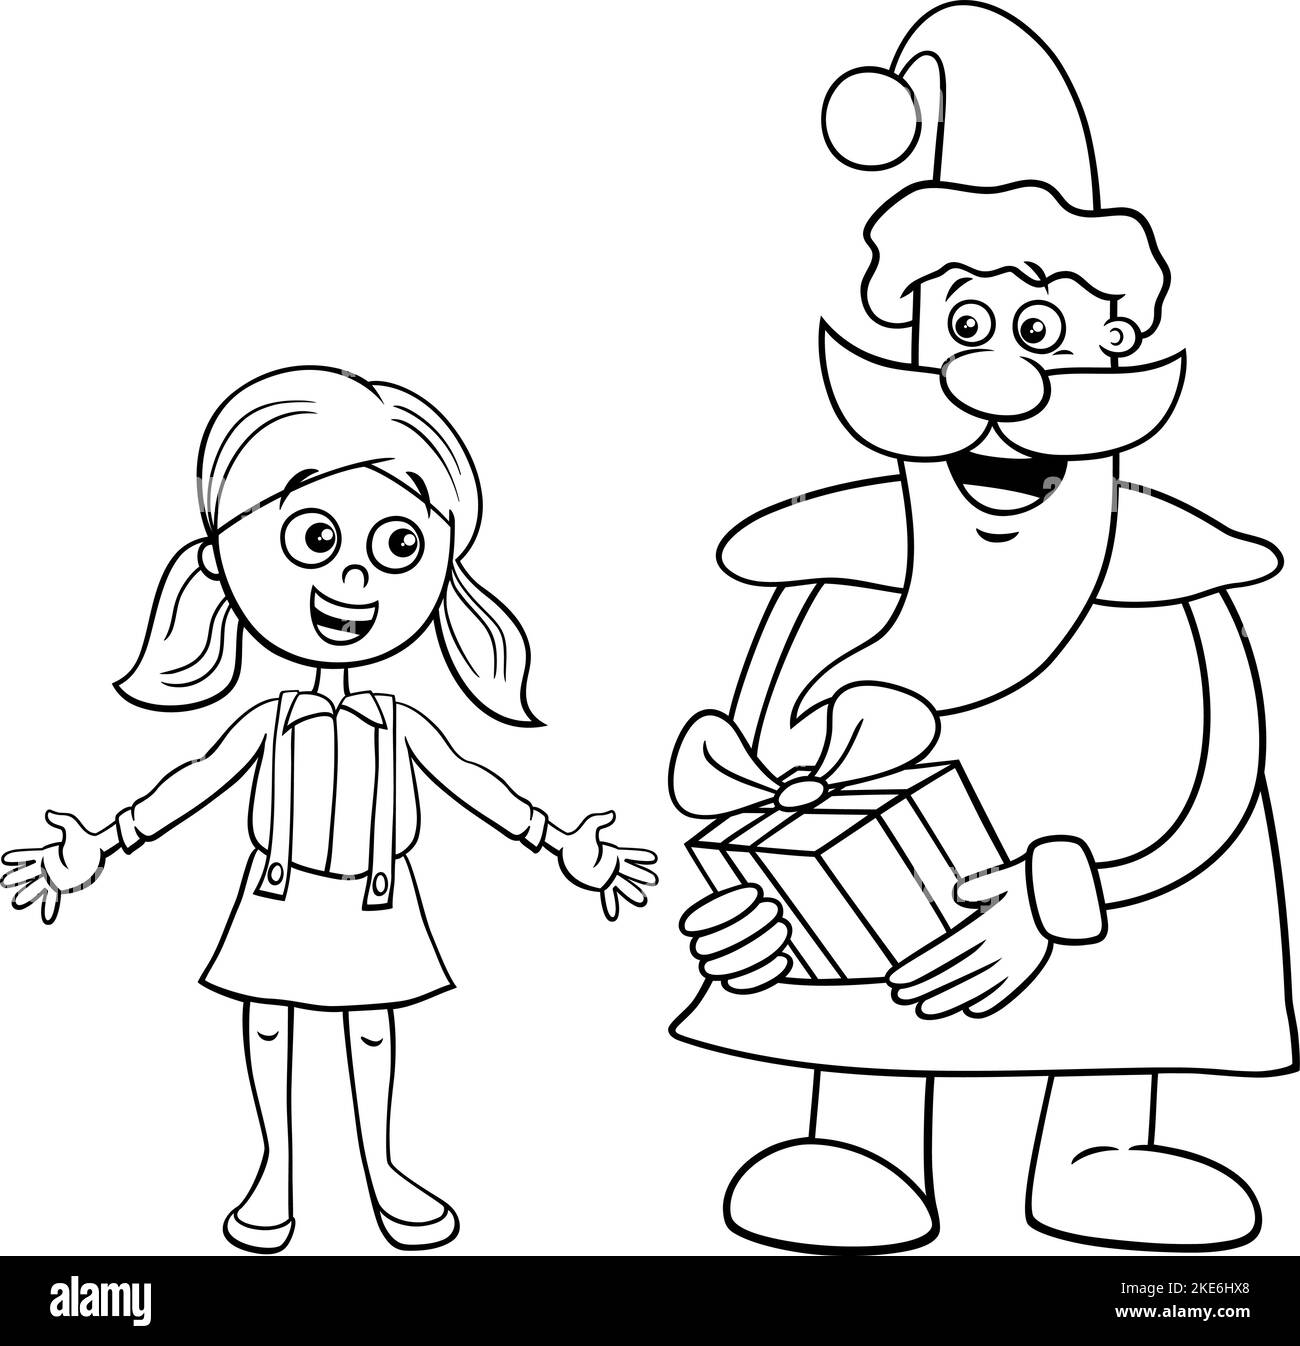 Black and white cartoon illustration of Santa Claus character giving a gift to little girl on Christmas time coloring page Stock Vector